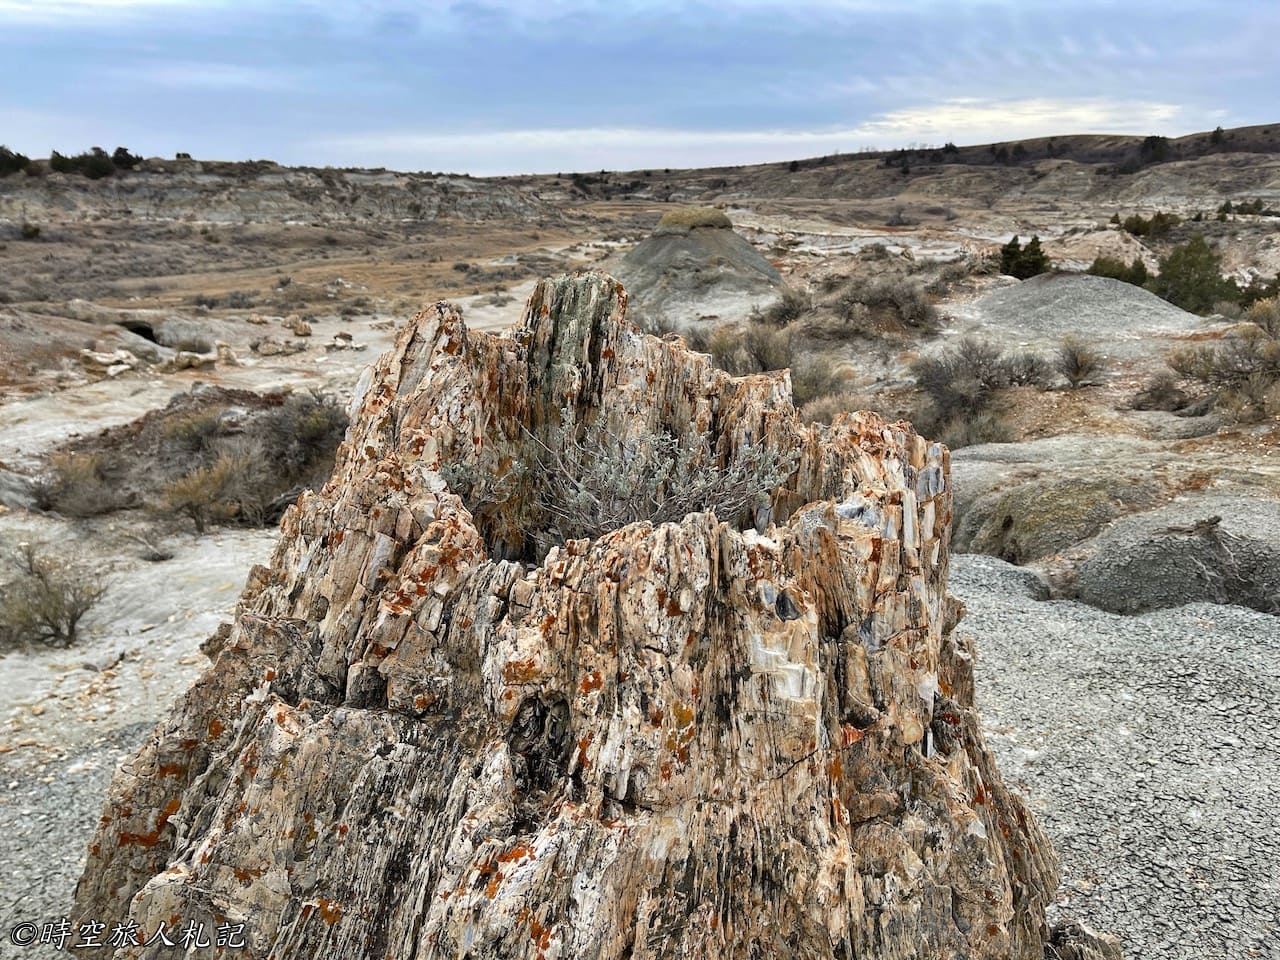 Theodore roosevelt national park petrified forest 羅斯福國家公園石化林